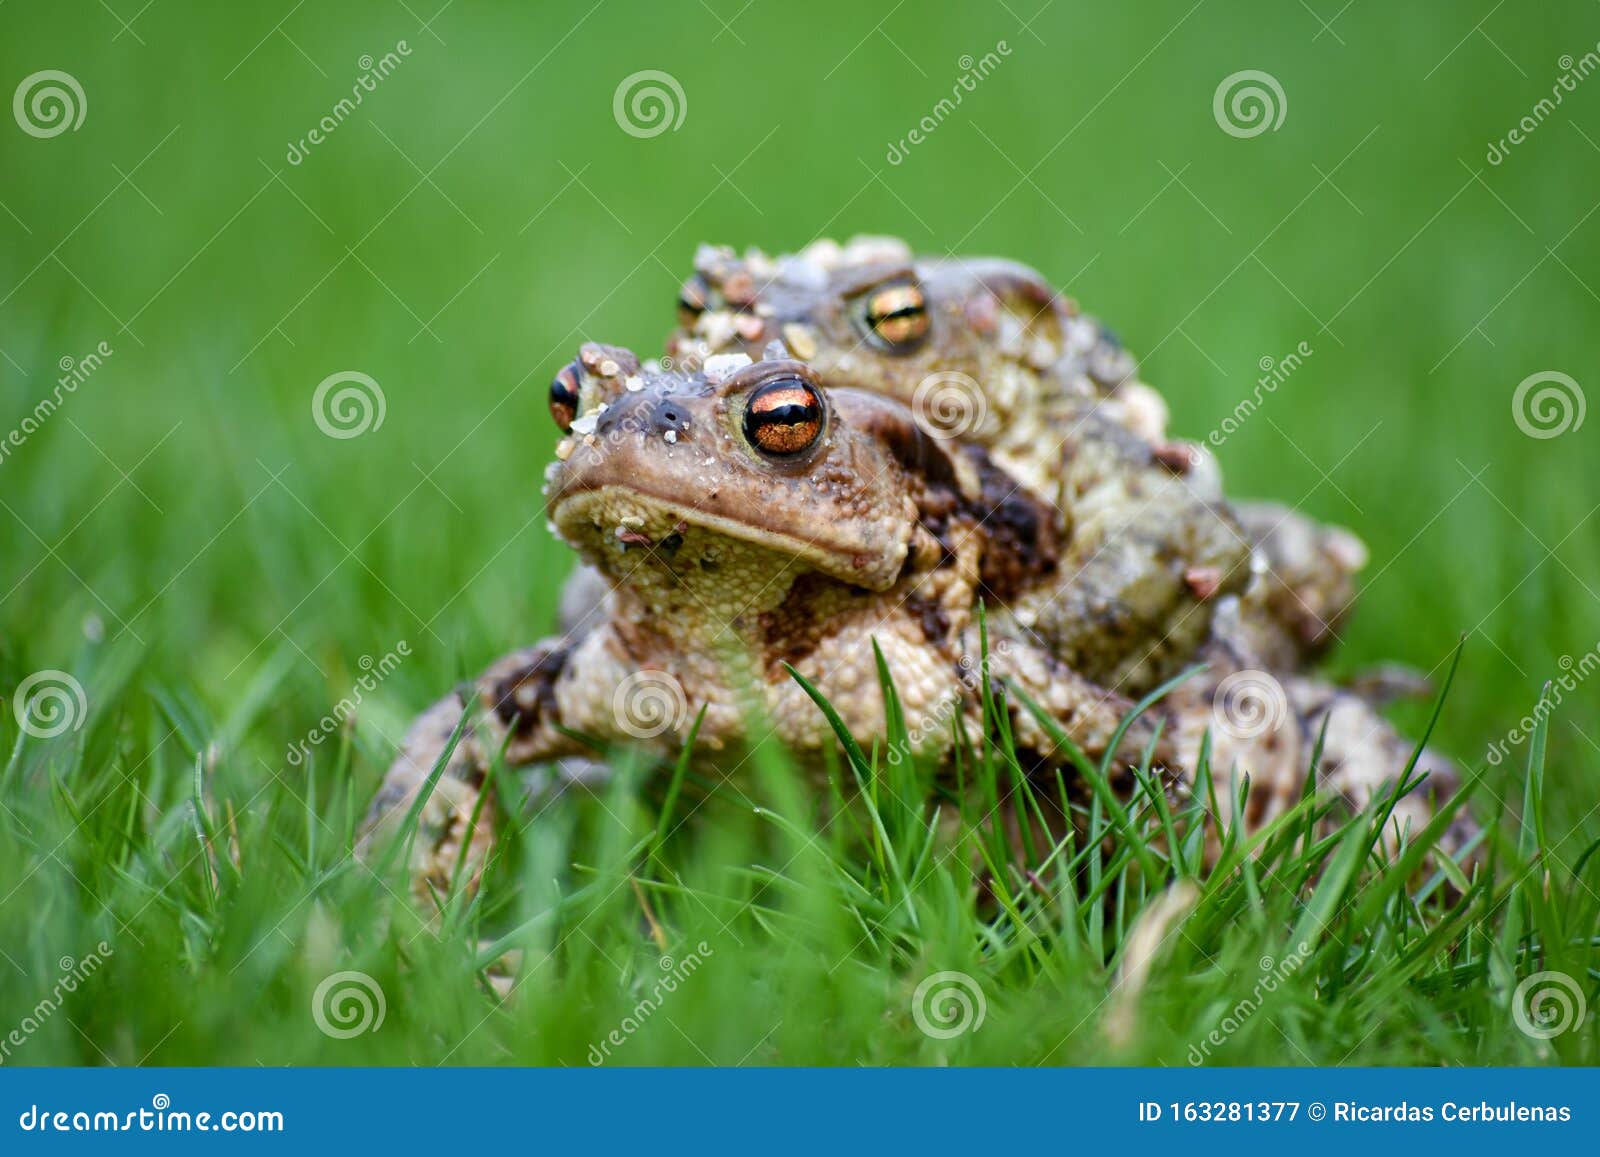 Frog in grass stock image. Image of frogs, frog, amphibian - 163281377